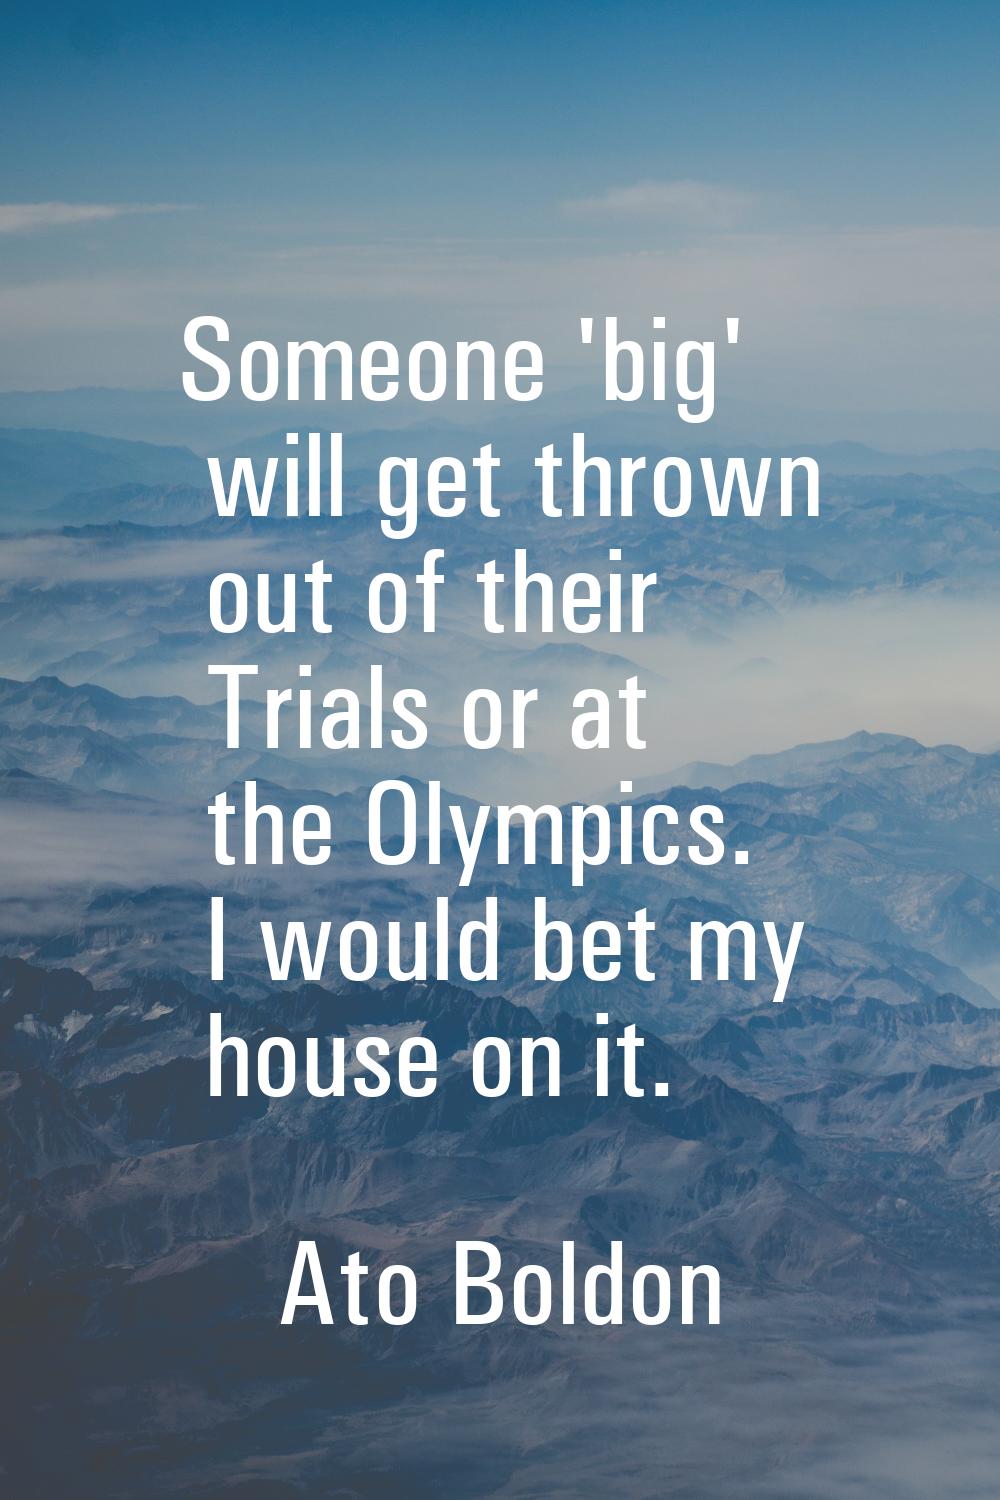 Someone 'big' will get thrown out of their Trials or at the Olympics. I would bet my house on it.